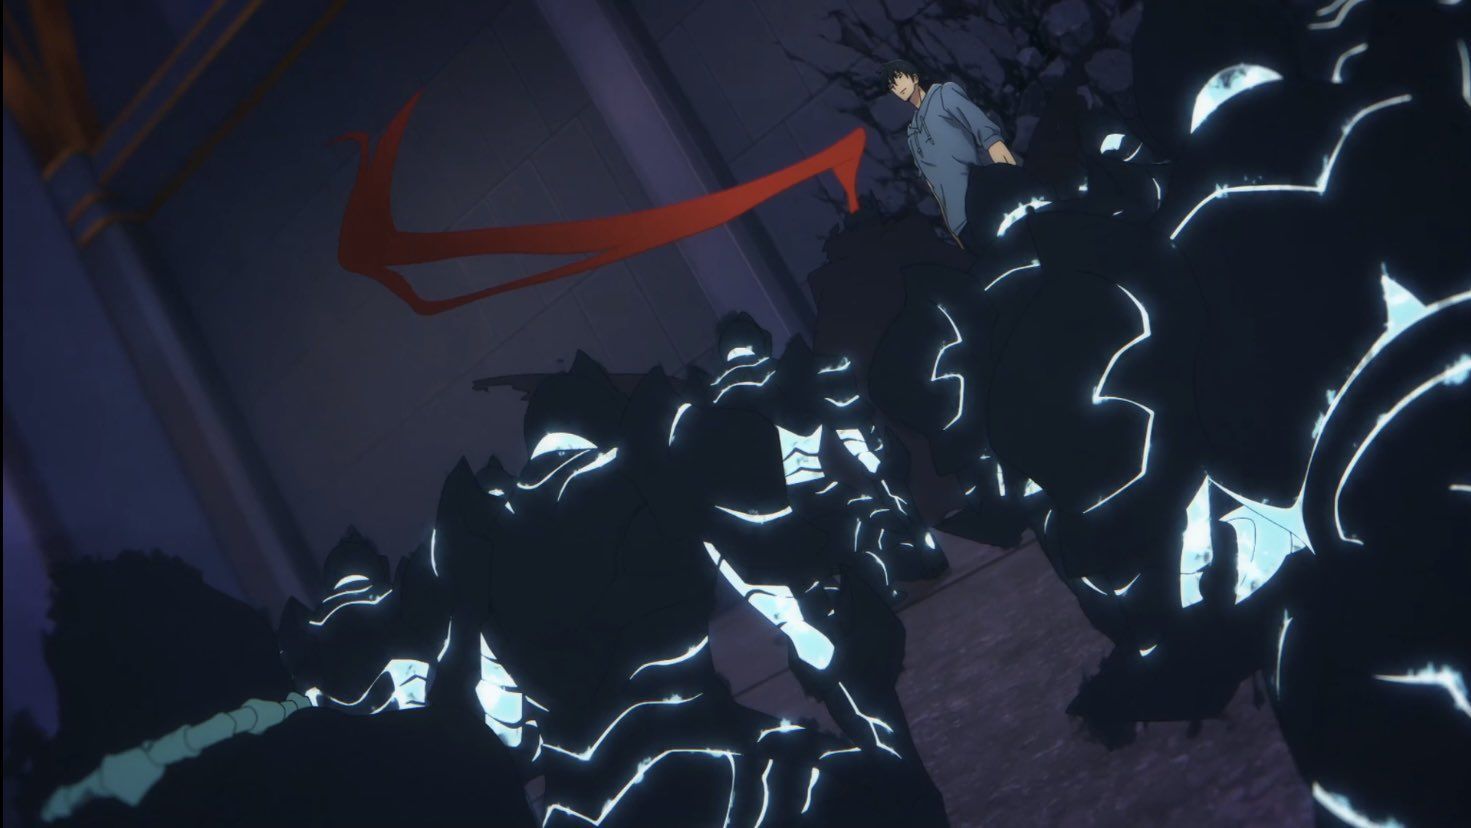 Sung Jinwoo and his shadow soldiers as seen in the anime (image via A-1 Pictures)